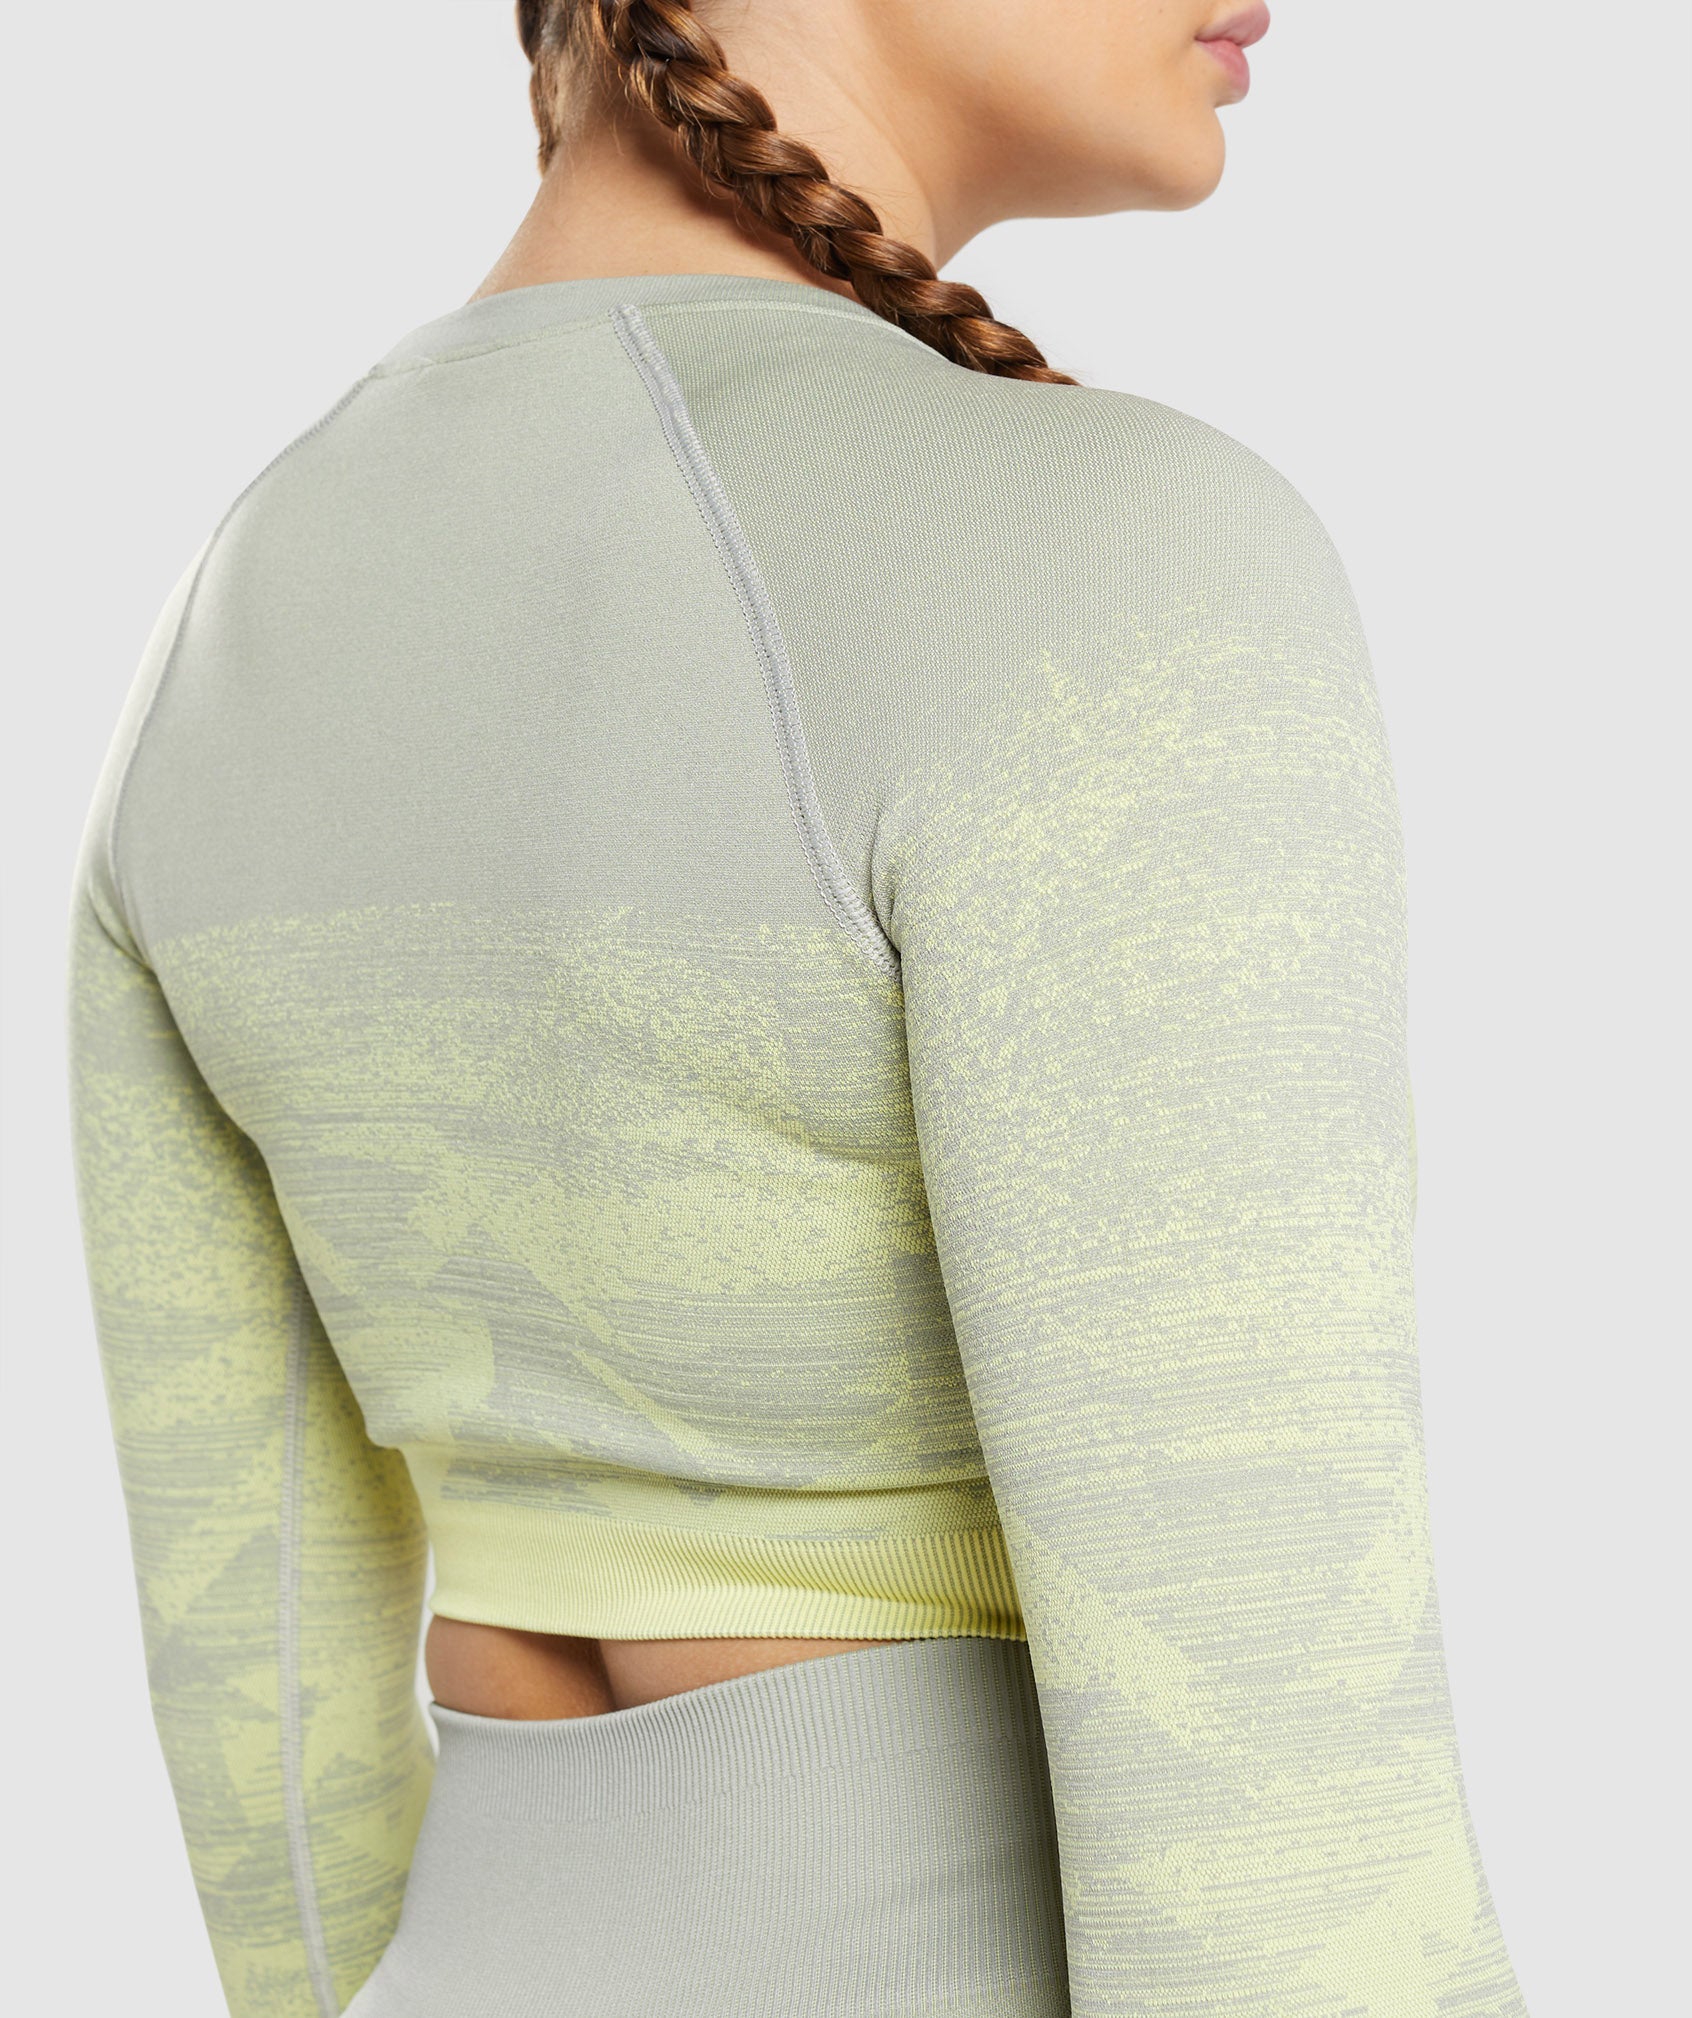 Adapt Ombre Crop Top in Triangle | Taupe Grey Print - view 6